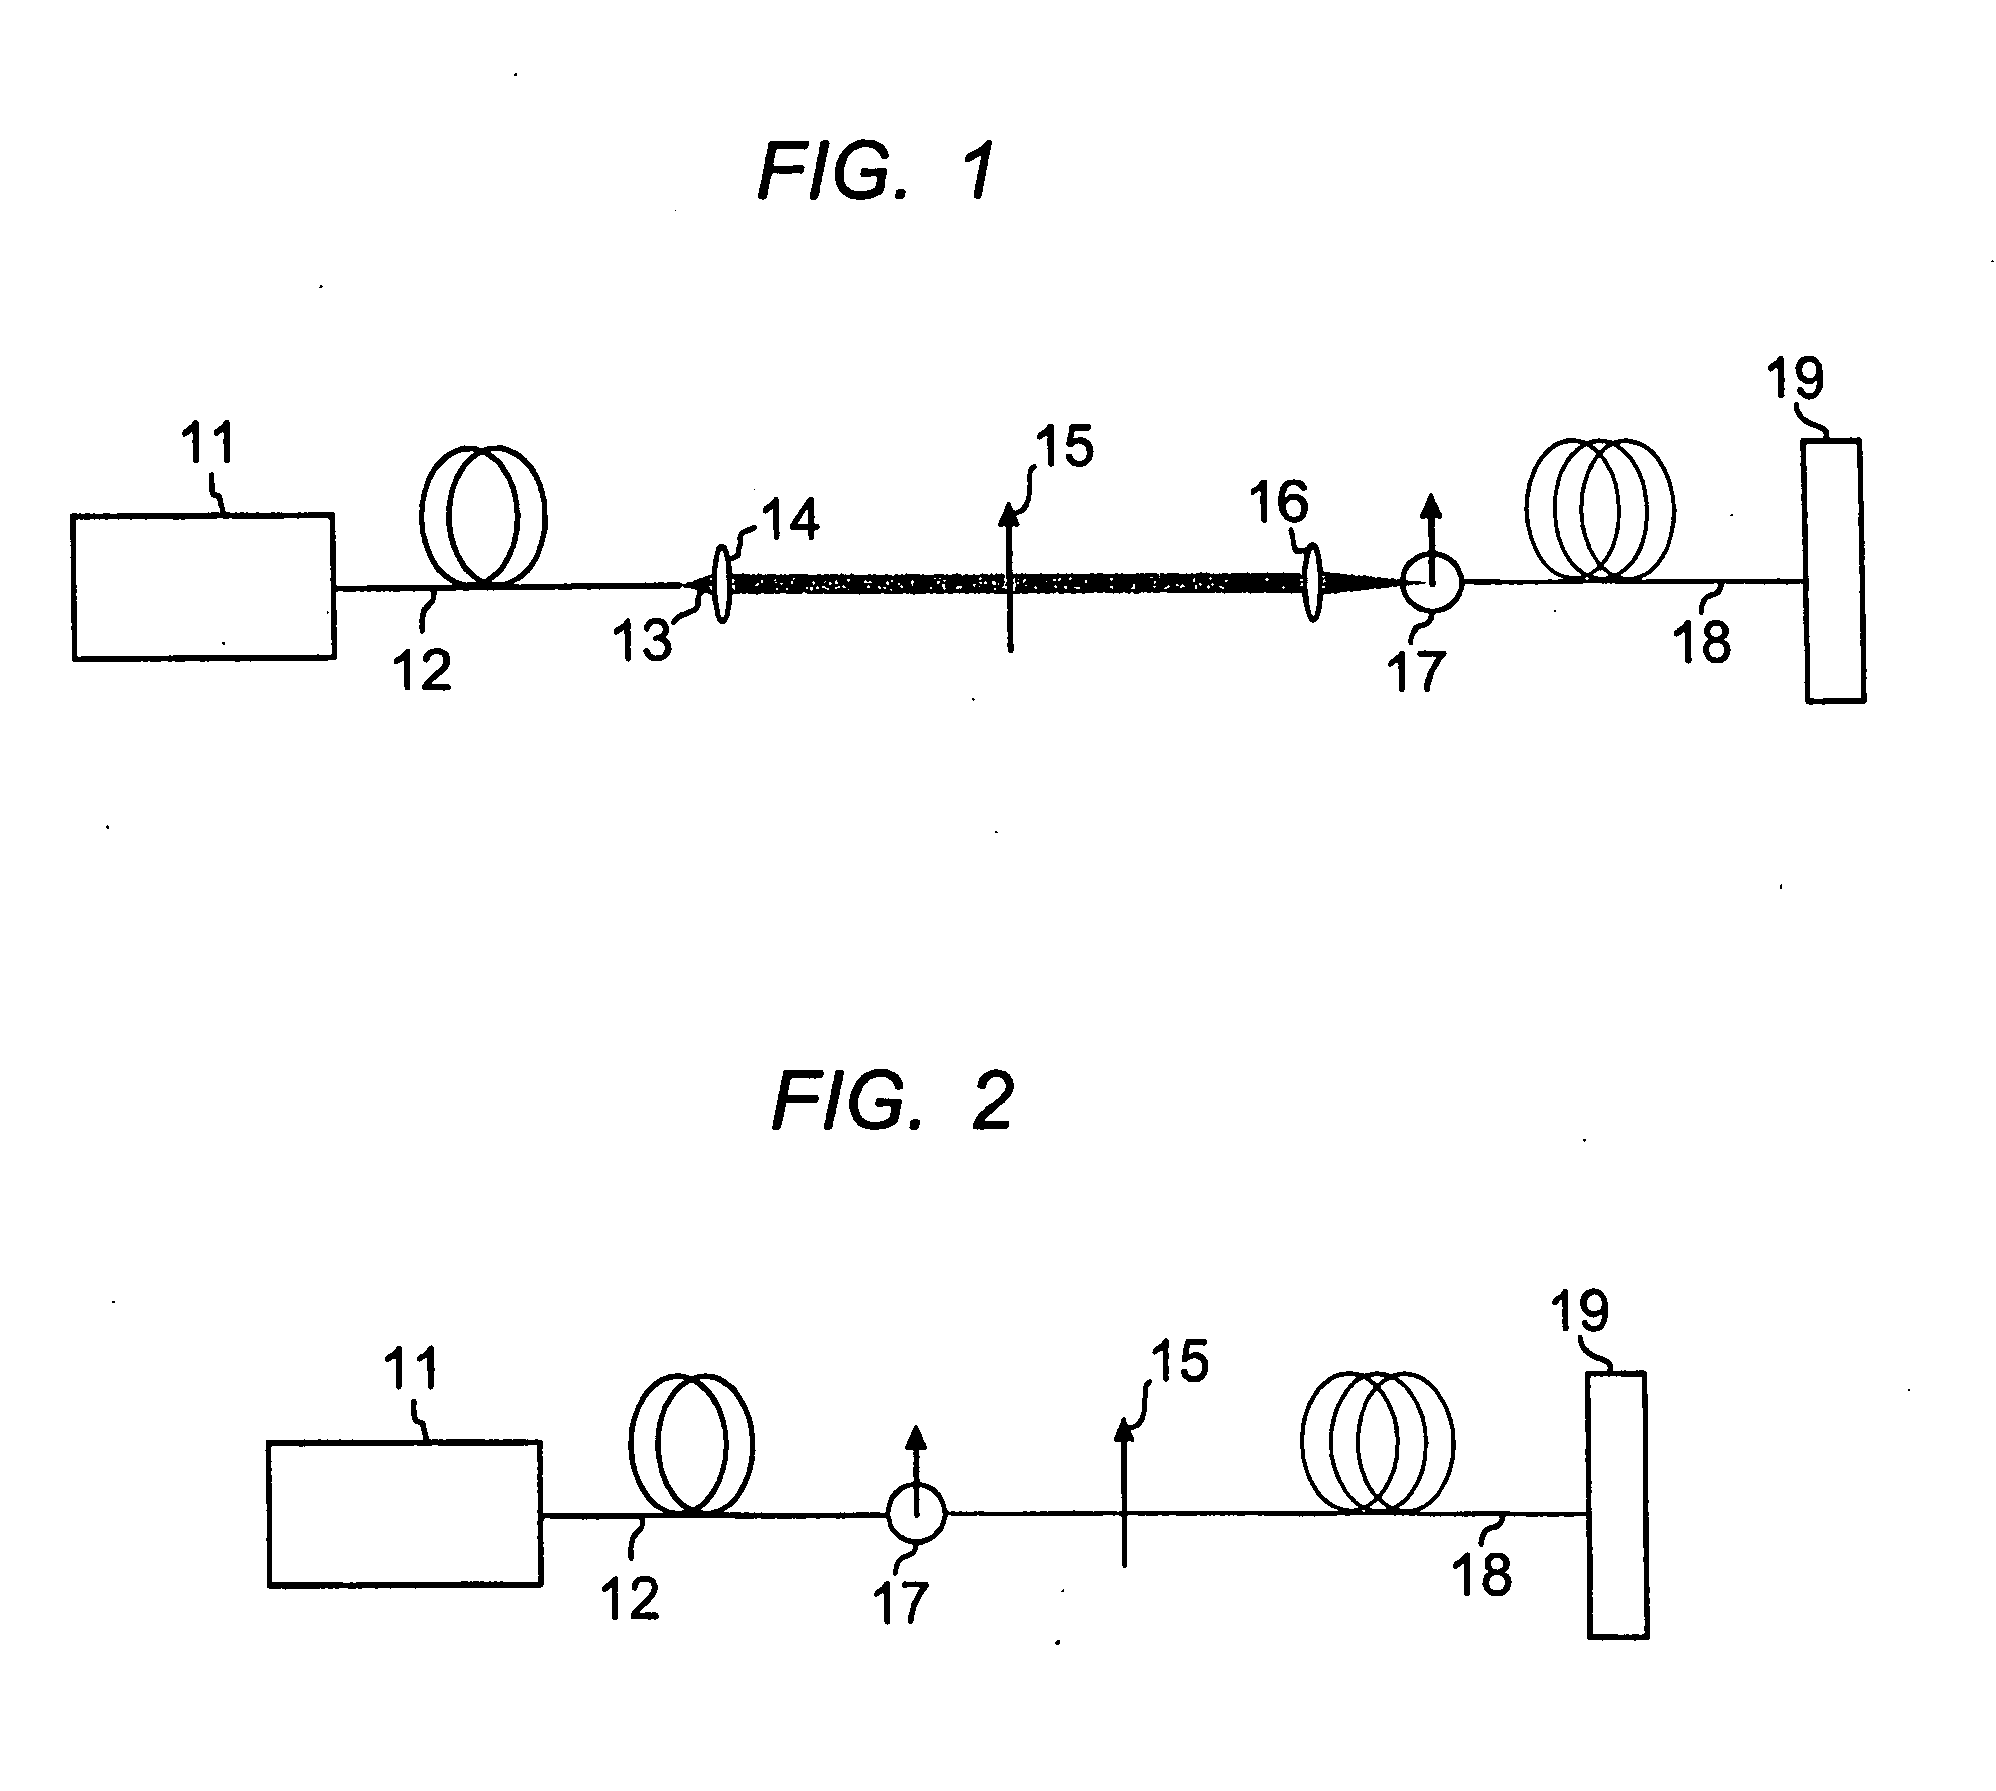 Measuring modal content of multi-moded fibers